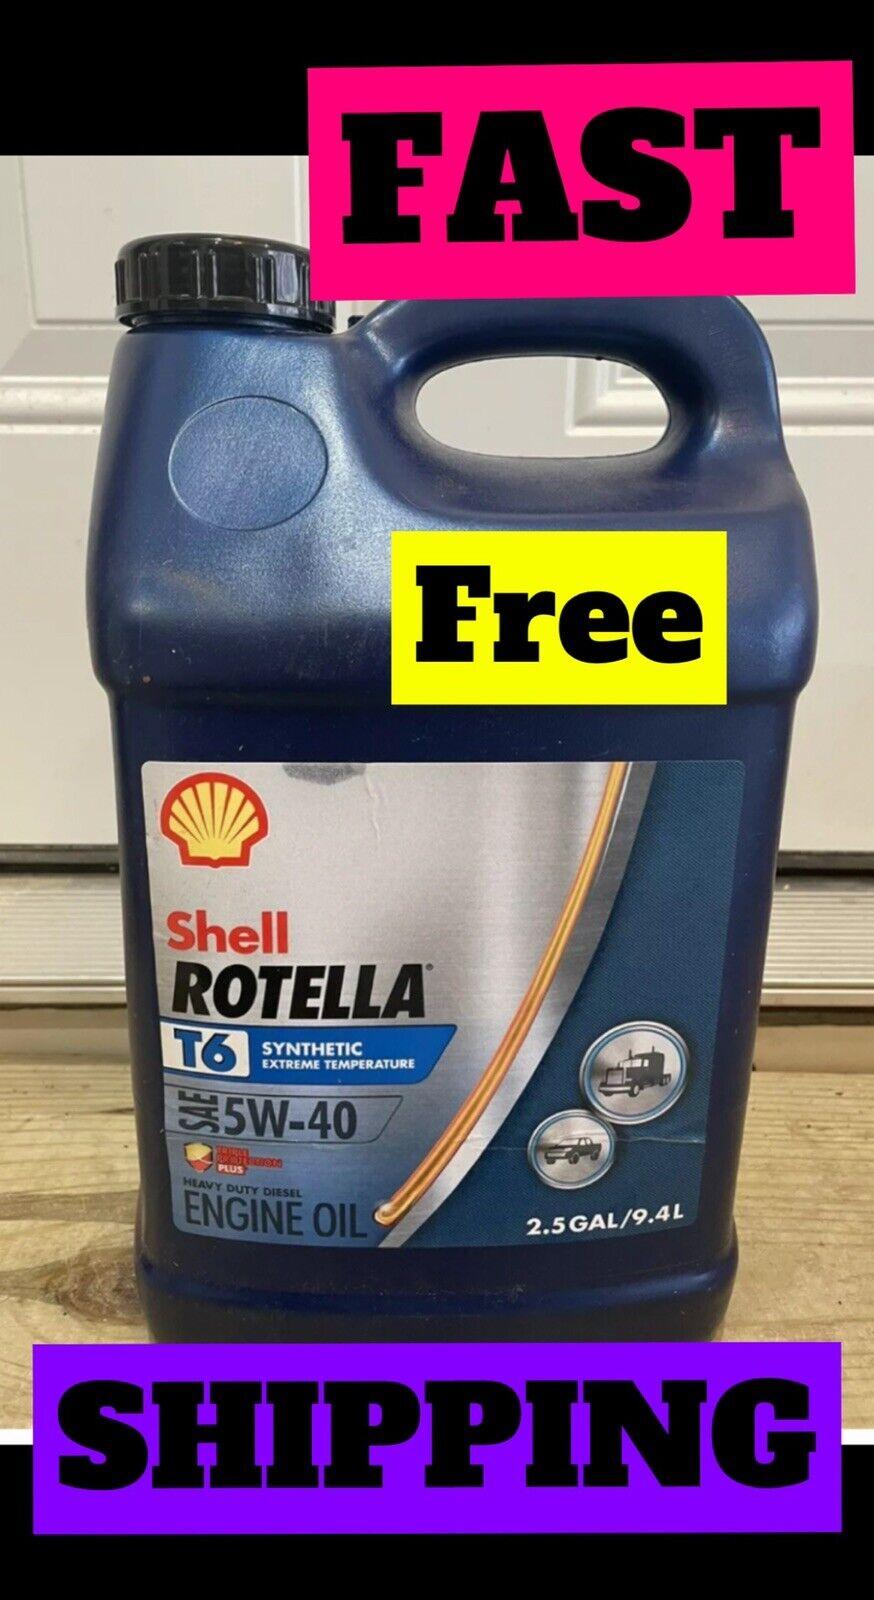 Shell Rotella T6 5W-40 Full Synthetic Diesel Engine Oil 2.5 Gal 5W40 Ships Today